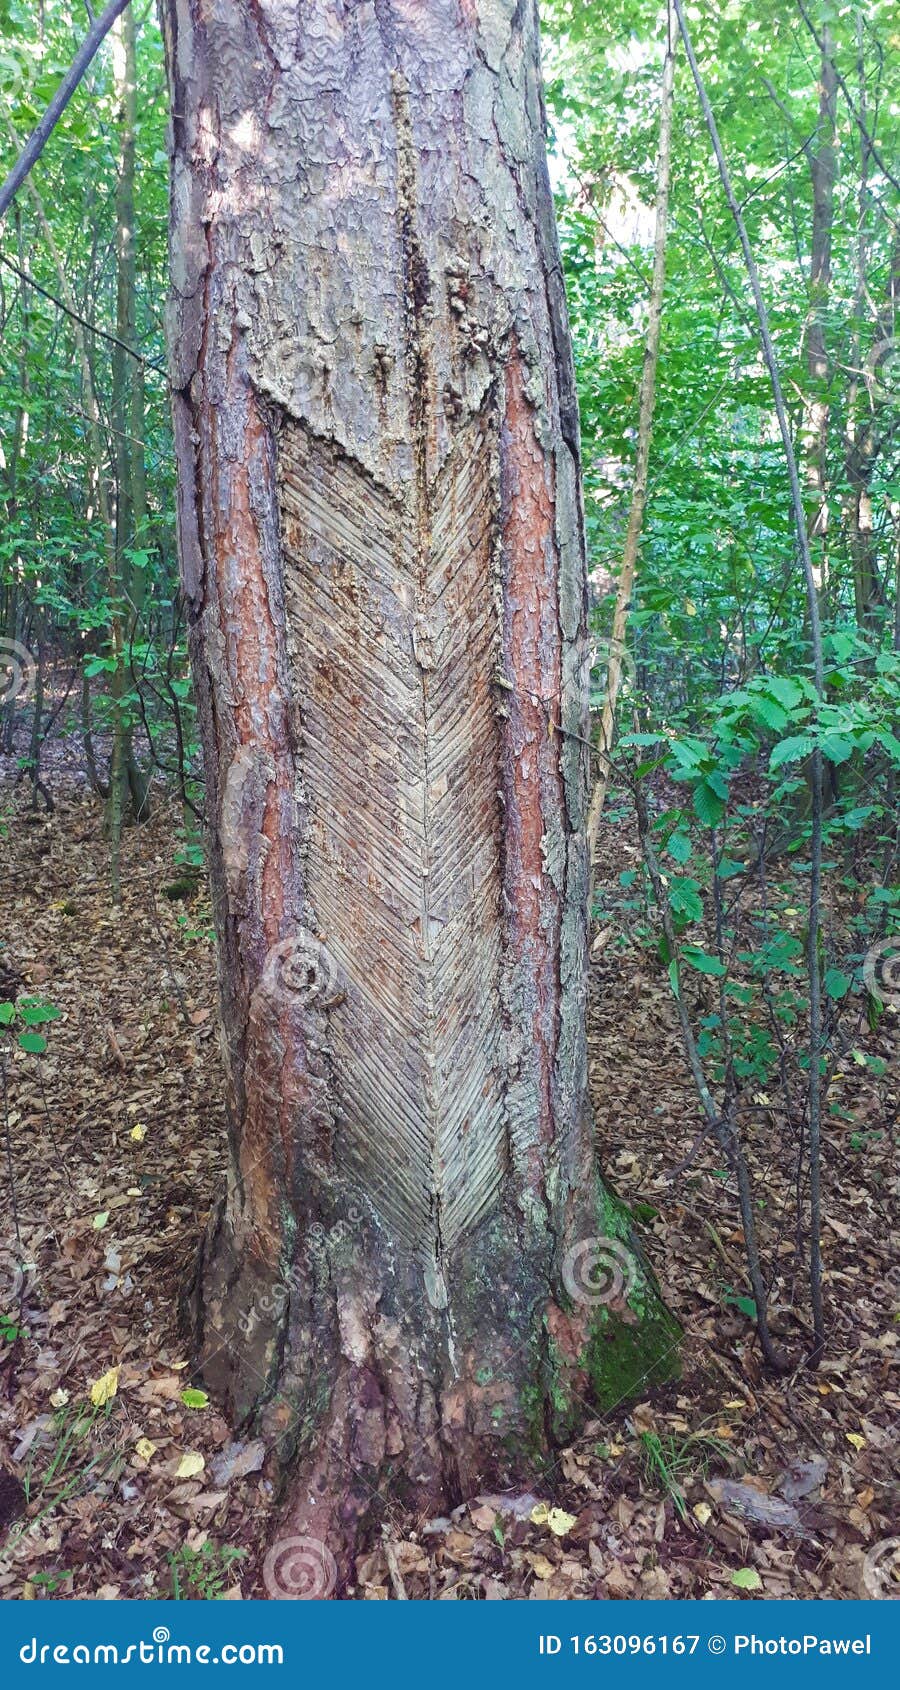 Technology How To Get Pine Wood for Glue and Turpentine Industry. Such Damaged and Dying Trees Can Be Found in Polish Fores Stock Image - Image of disease, drop: 163096167